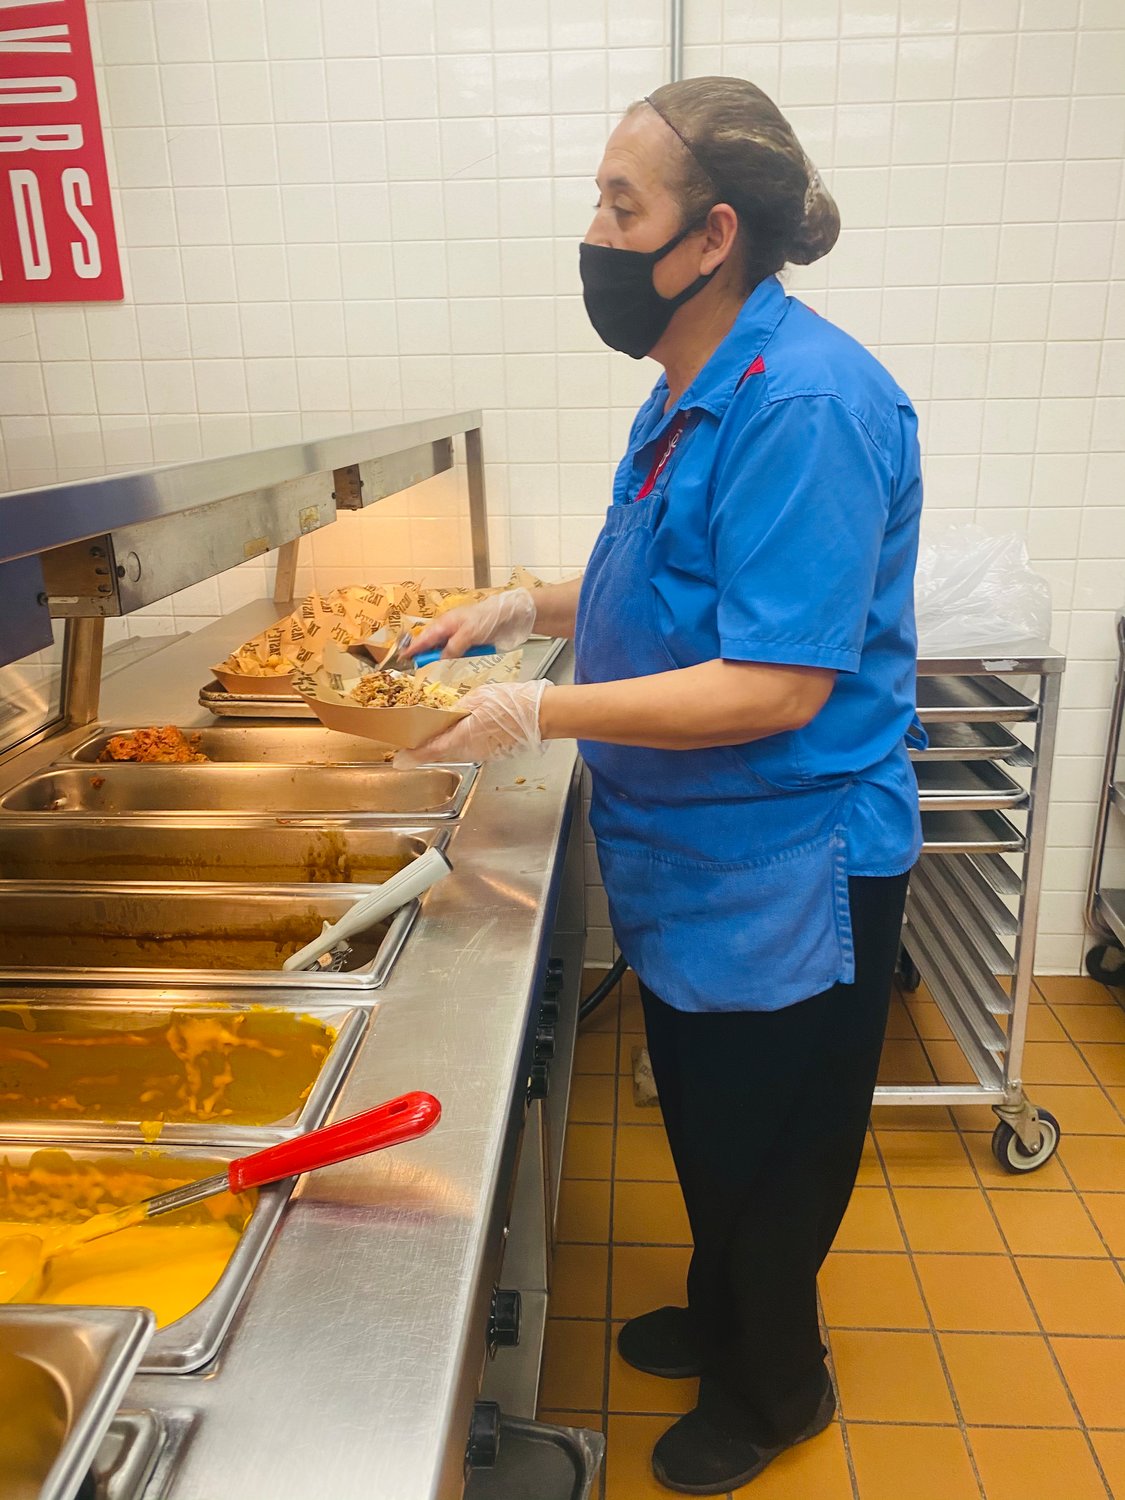 Hendry Sodexo Food Service Employees serve up nutritious and delicious foods daily.